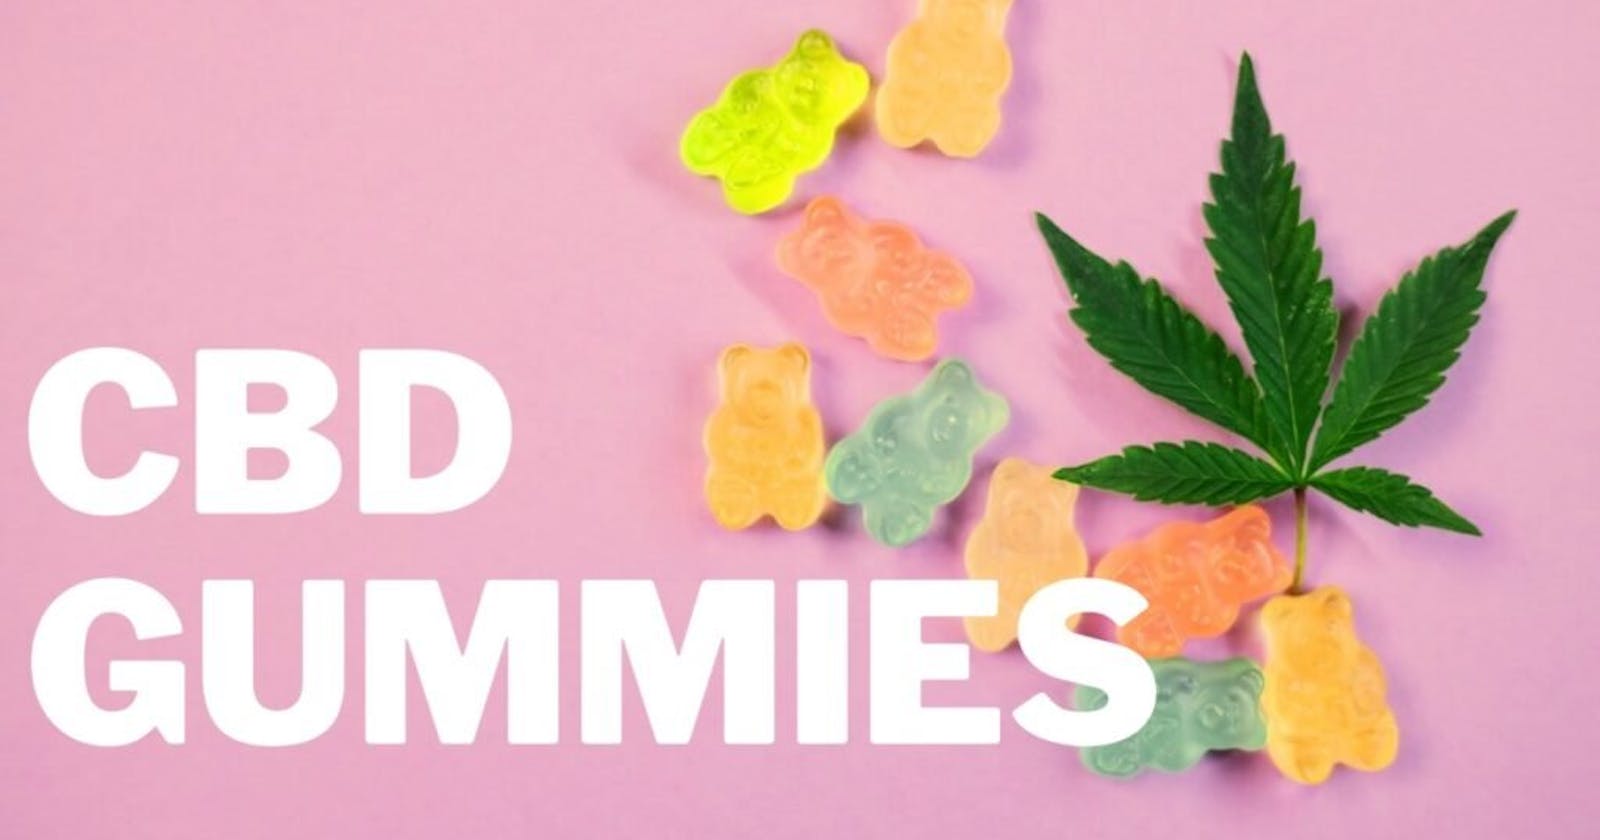 Balance CBD Gummies Reviews - (Pros and Cons) Is It Scam Or Legit?